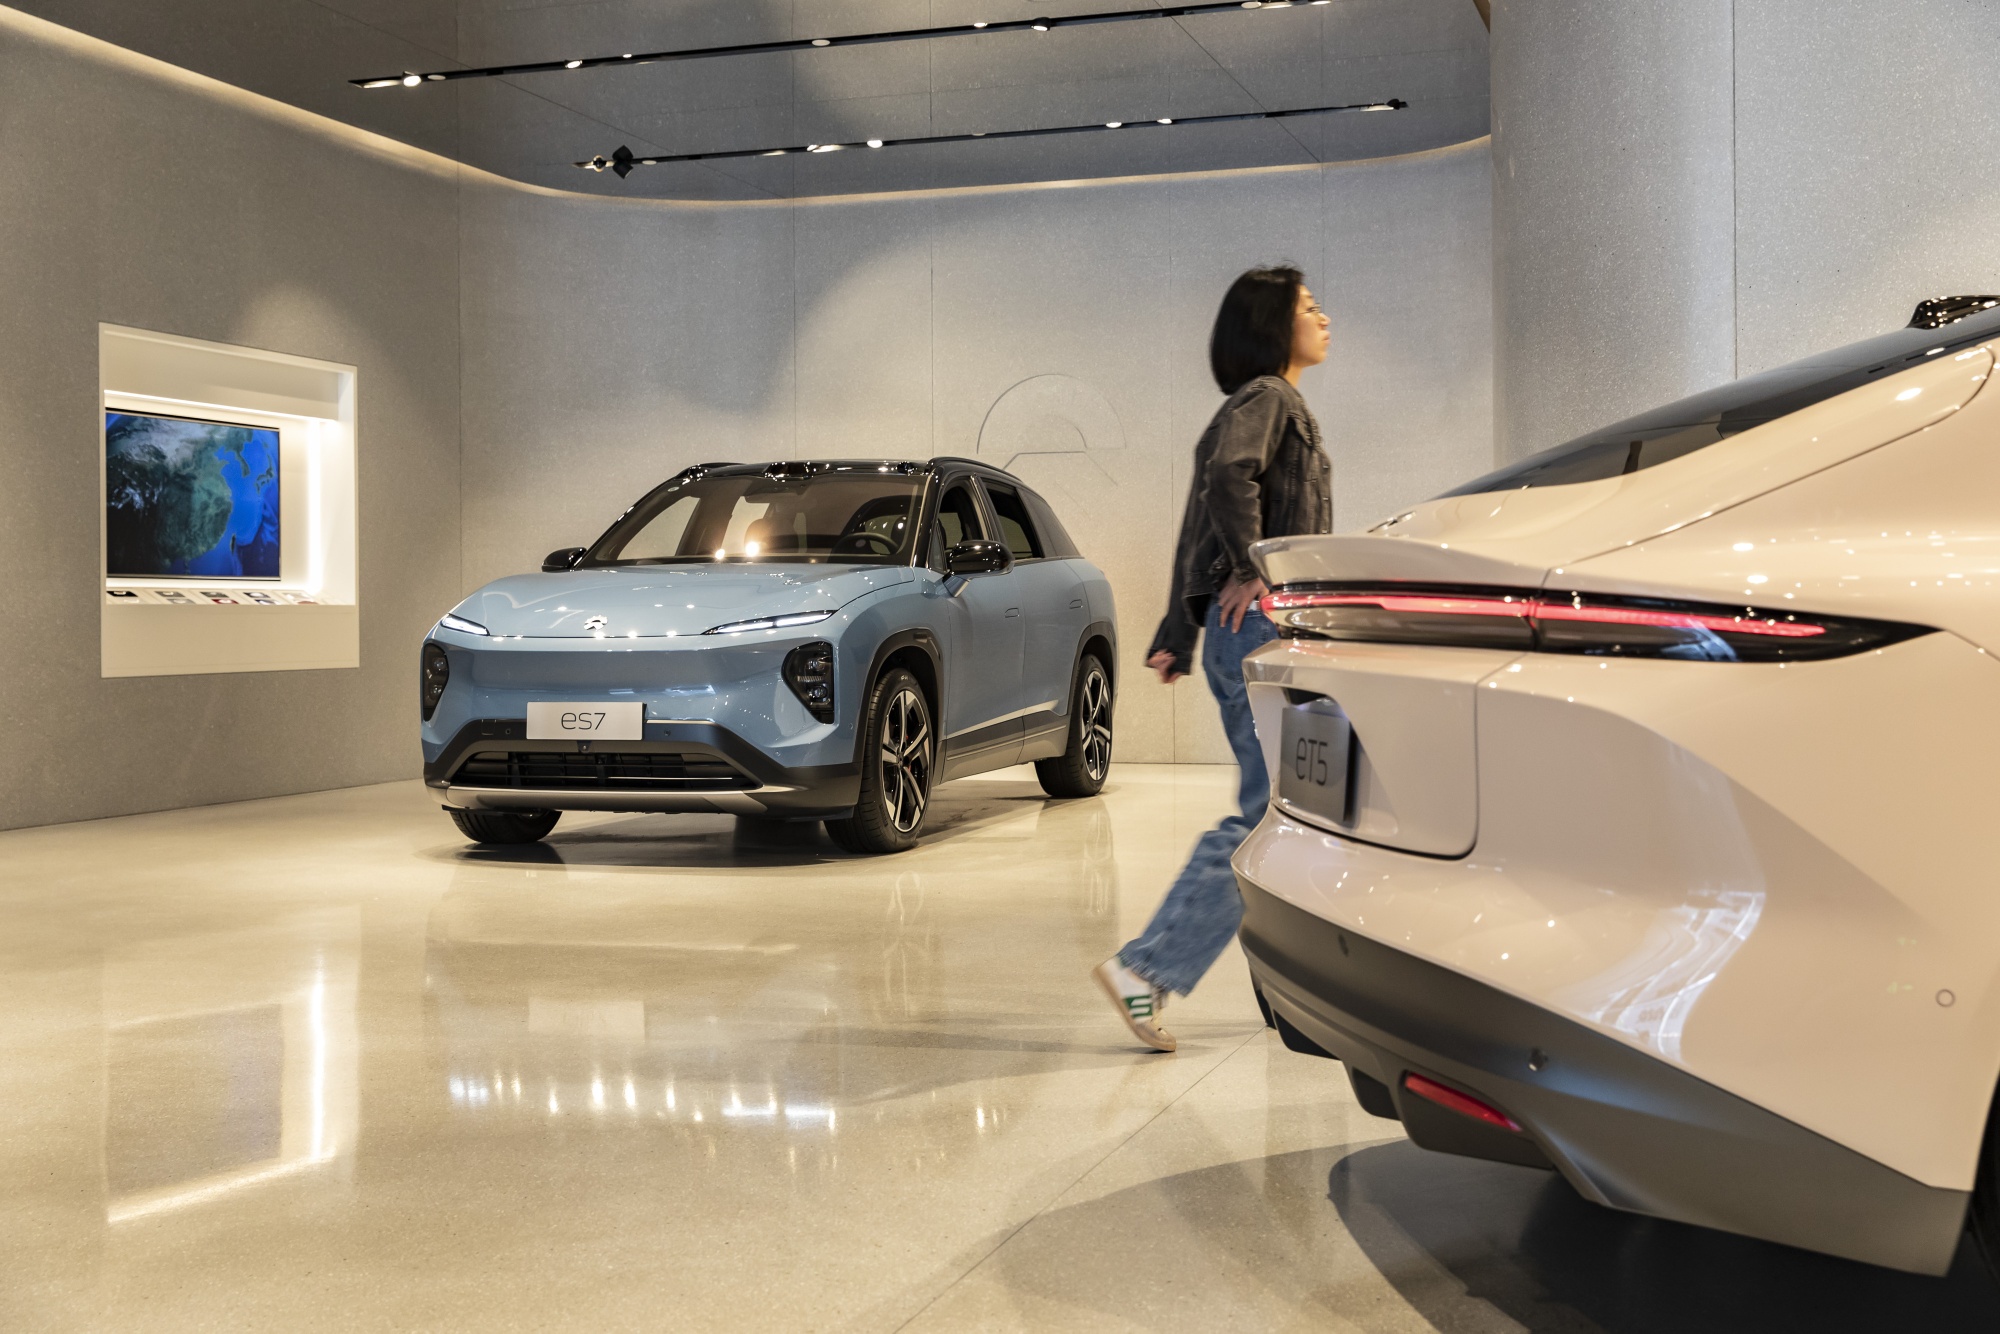 EV Maker Nio Partners With Changan Auto on Battery Swapping - Bloomberg